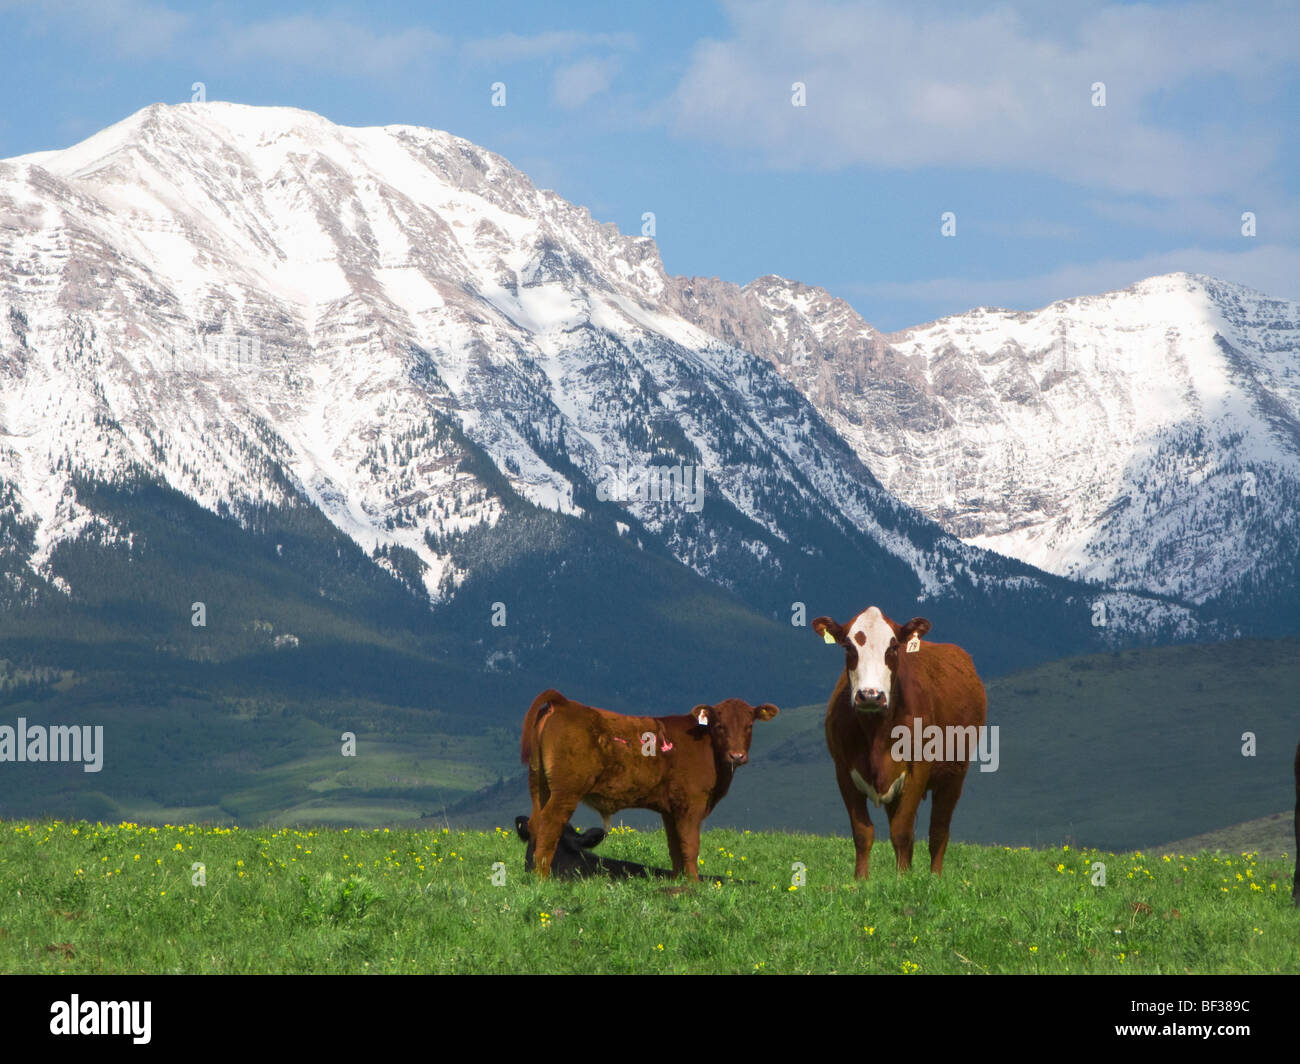 Livestock - Crossbred beef cow on a foothill pasture with snow covered Canadian Rockies in the background / Alberta, Canada. Stock Photo